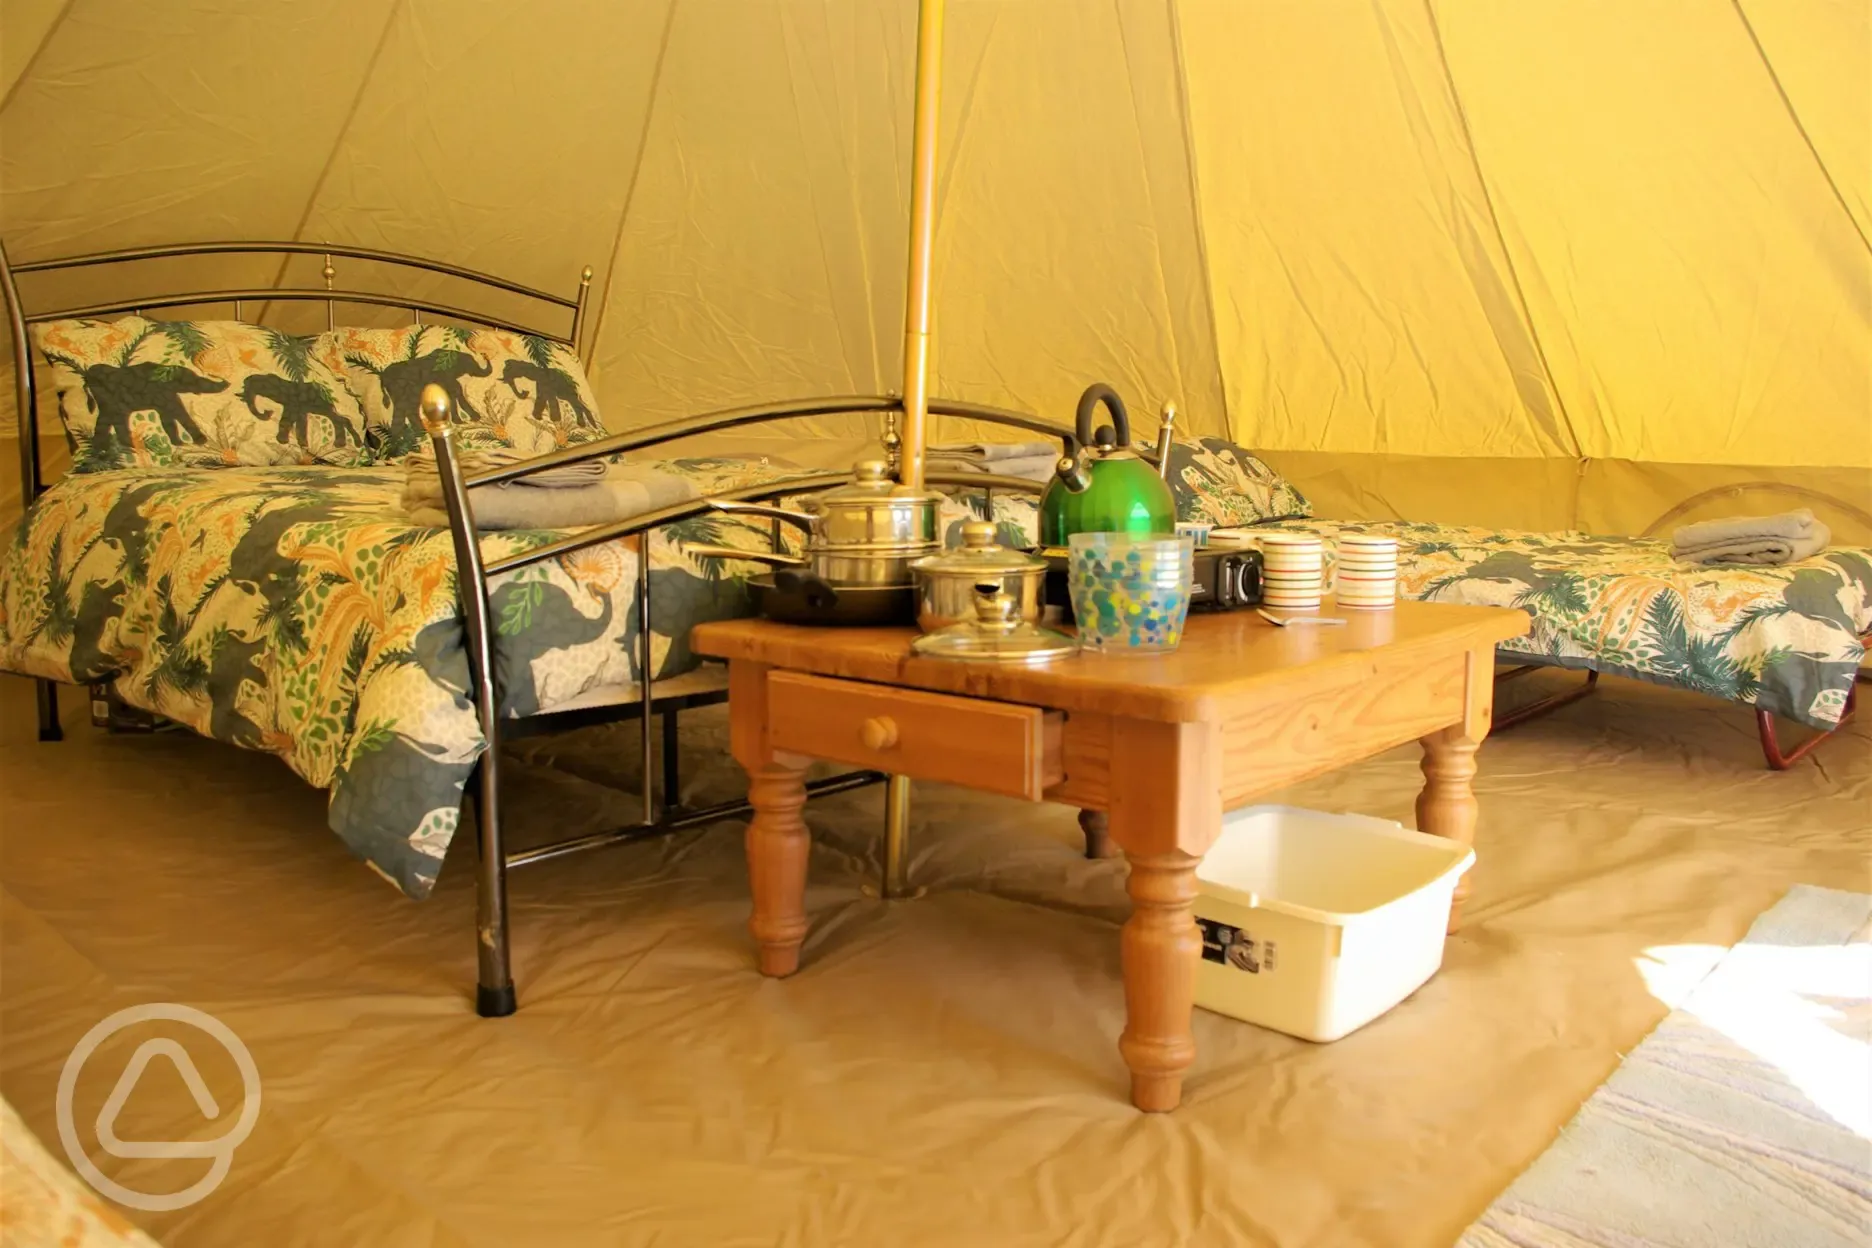 Inside the bell tents